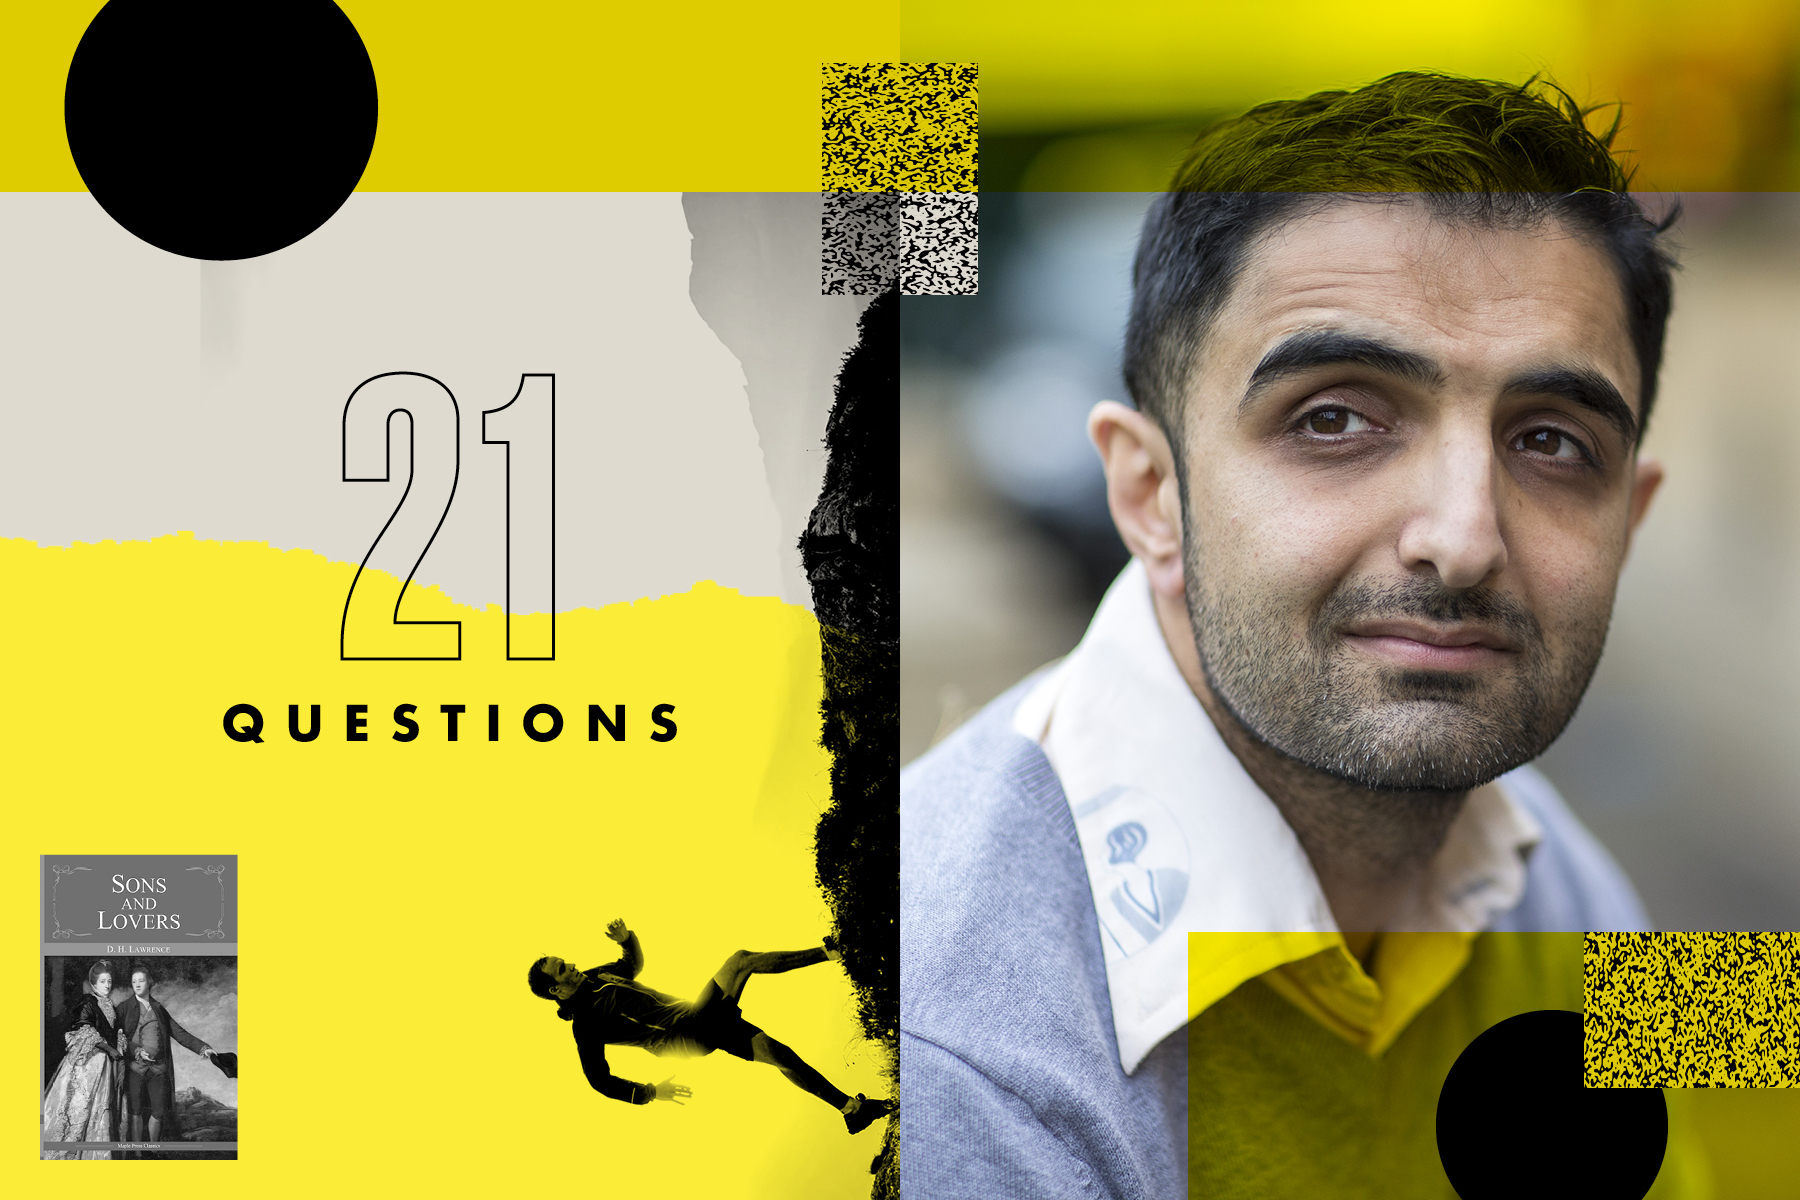 A photo of Sunjeev Sahota, the author of China Room, side-by-side with the interview title, 21 Questions, on a yellow and grayscale background.